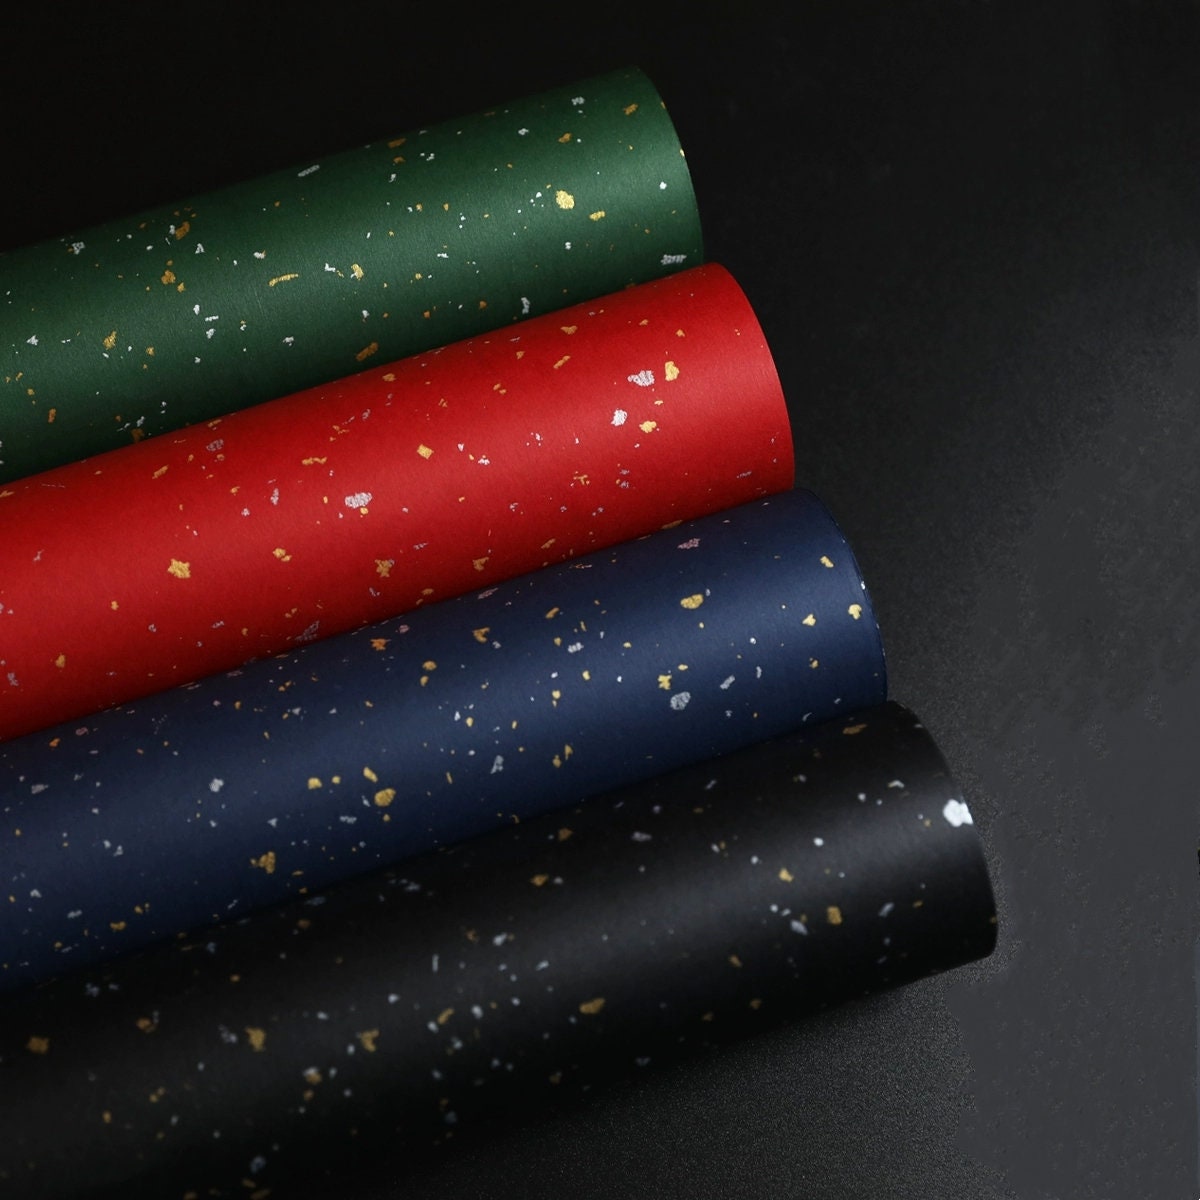 Night Sky Wrapping Paper Set Christmas Gift Wrap Star 